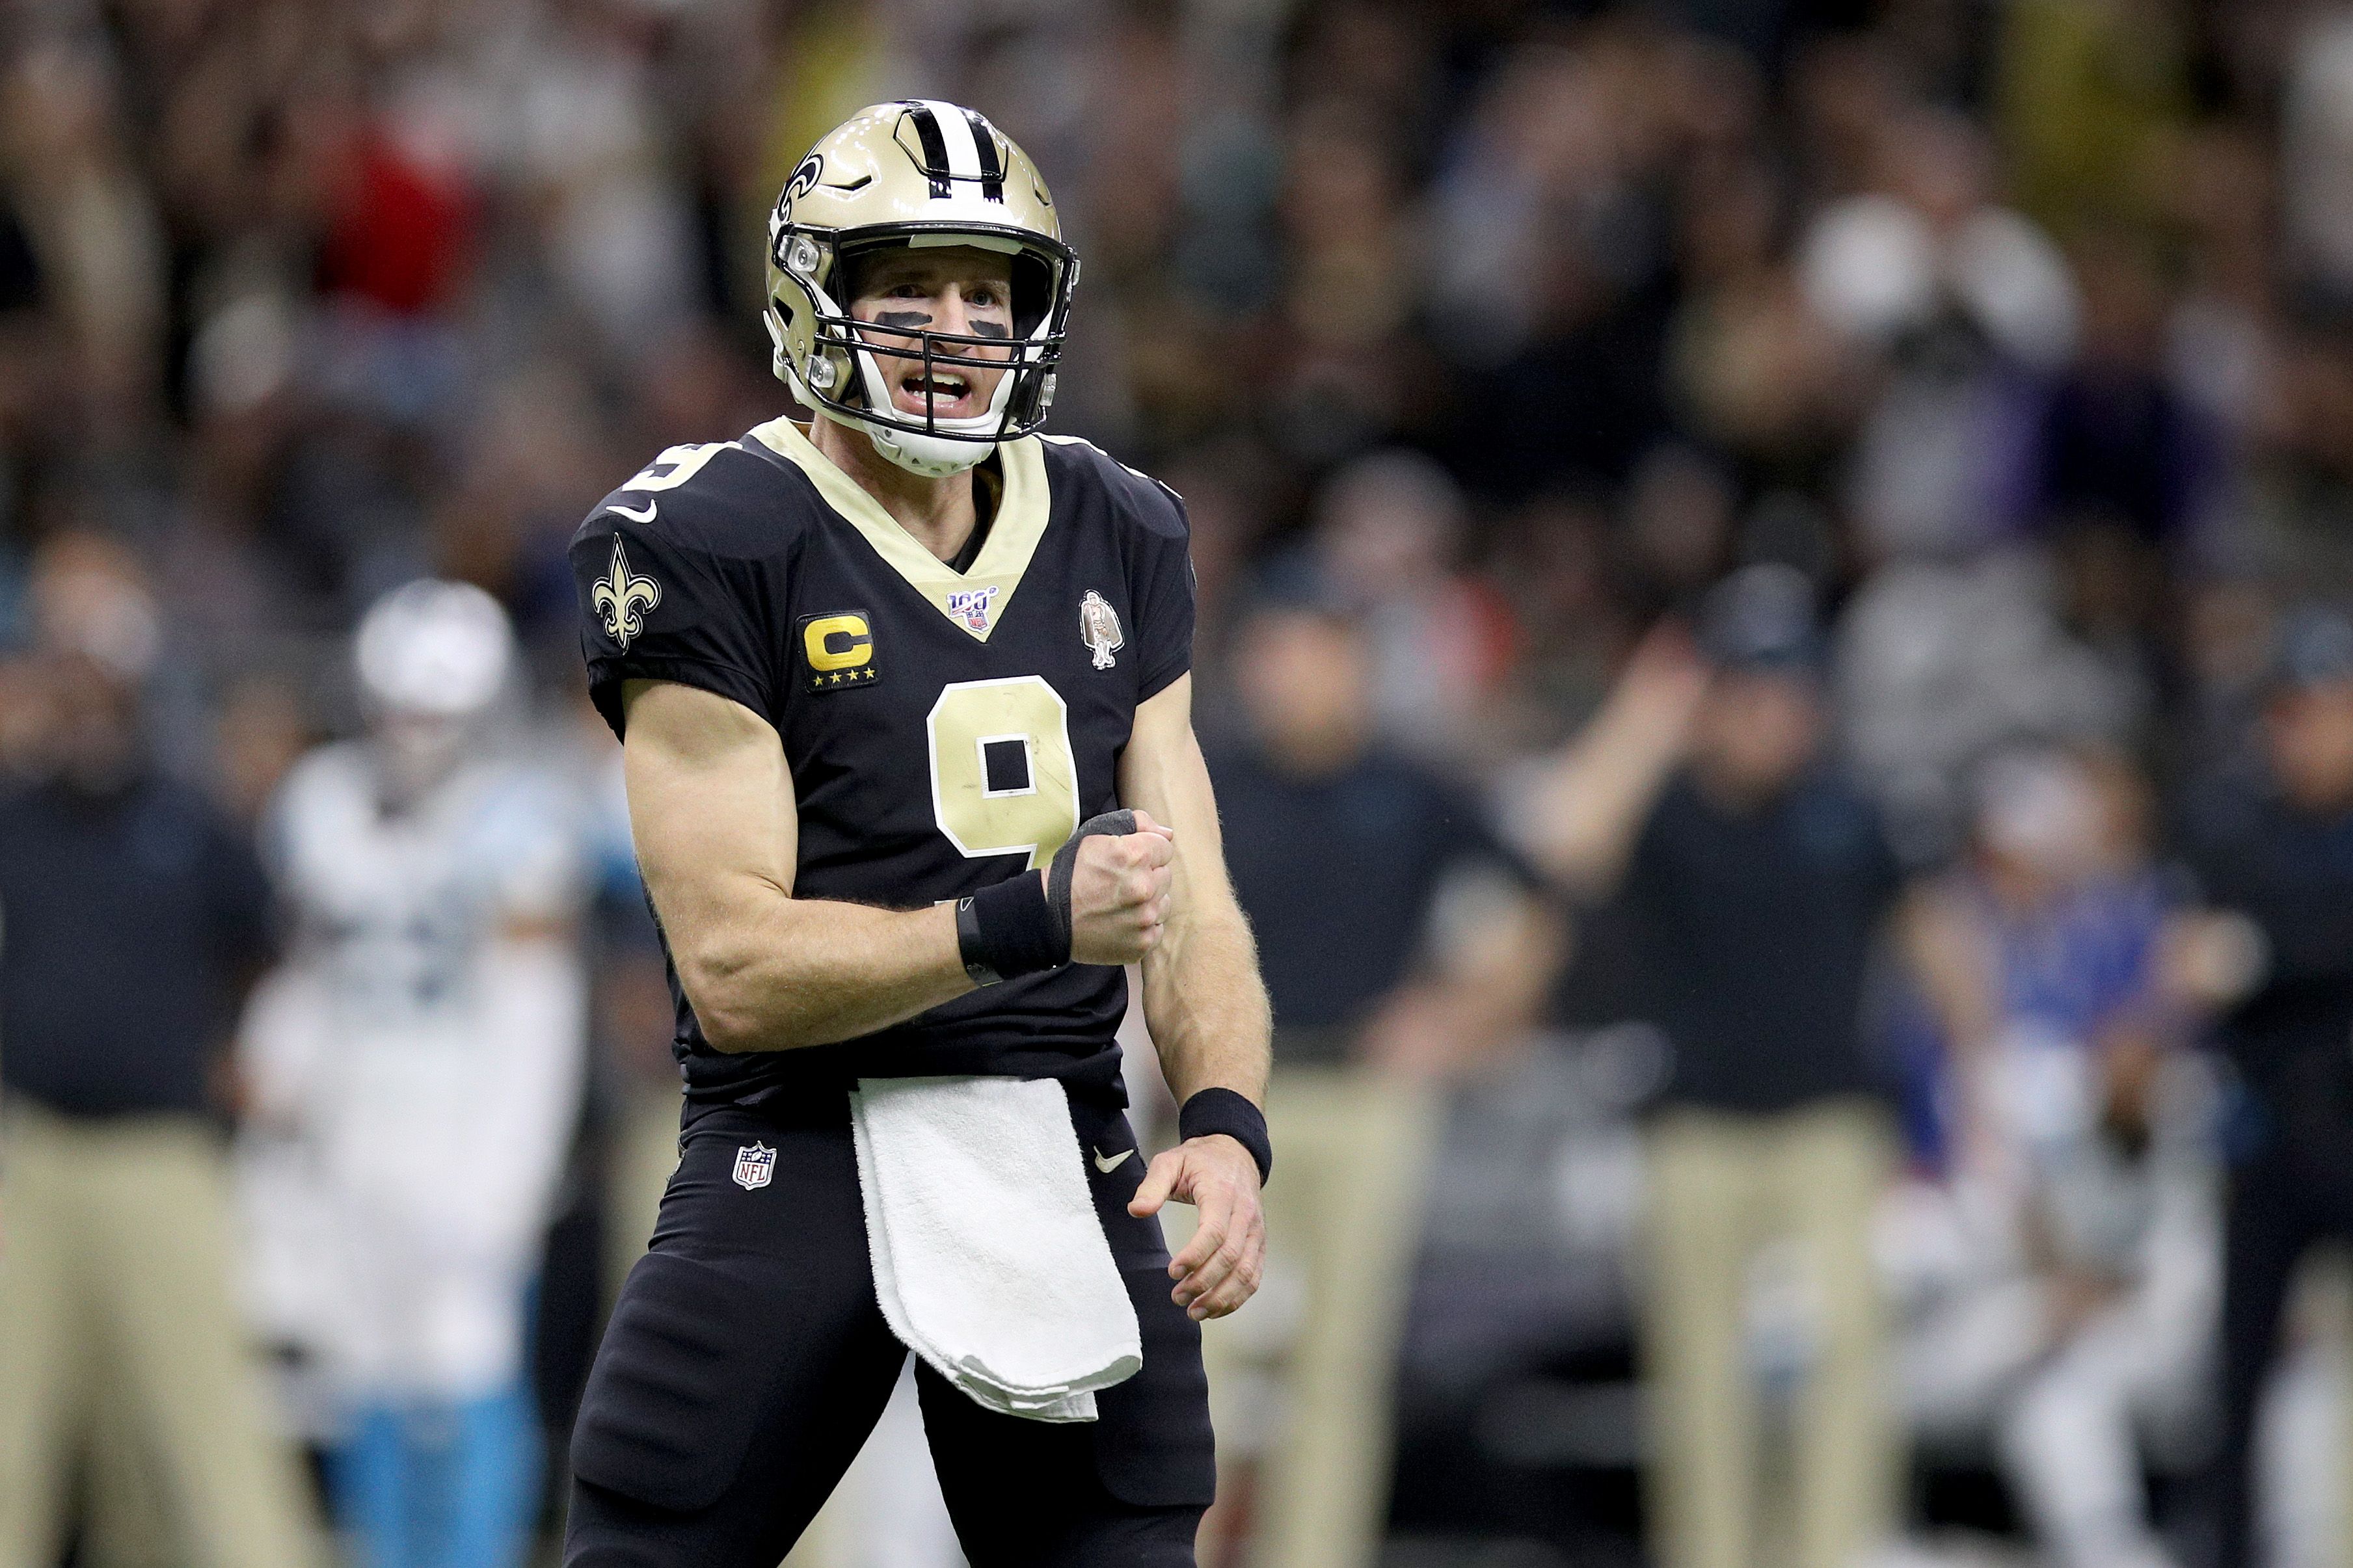 Drew Brees injures right elbow, still expected to play against Colts